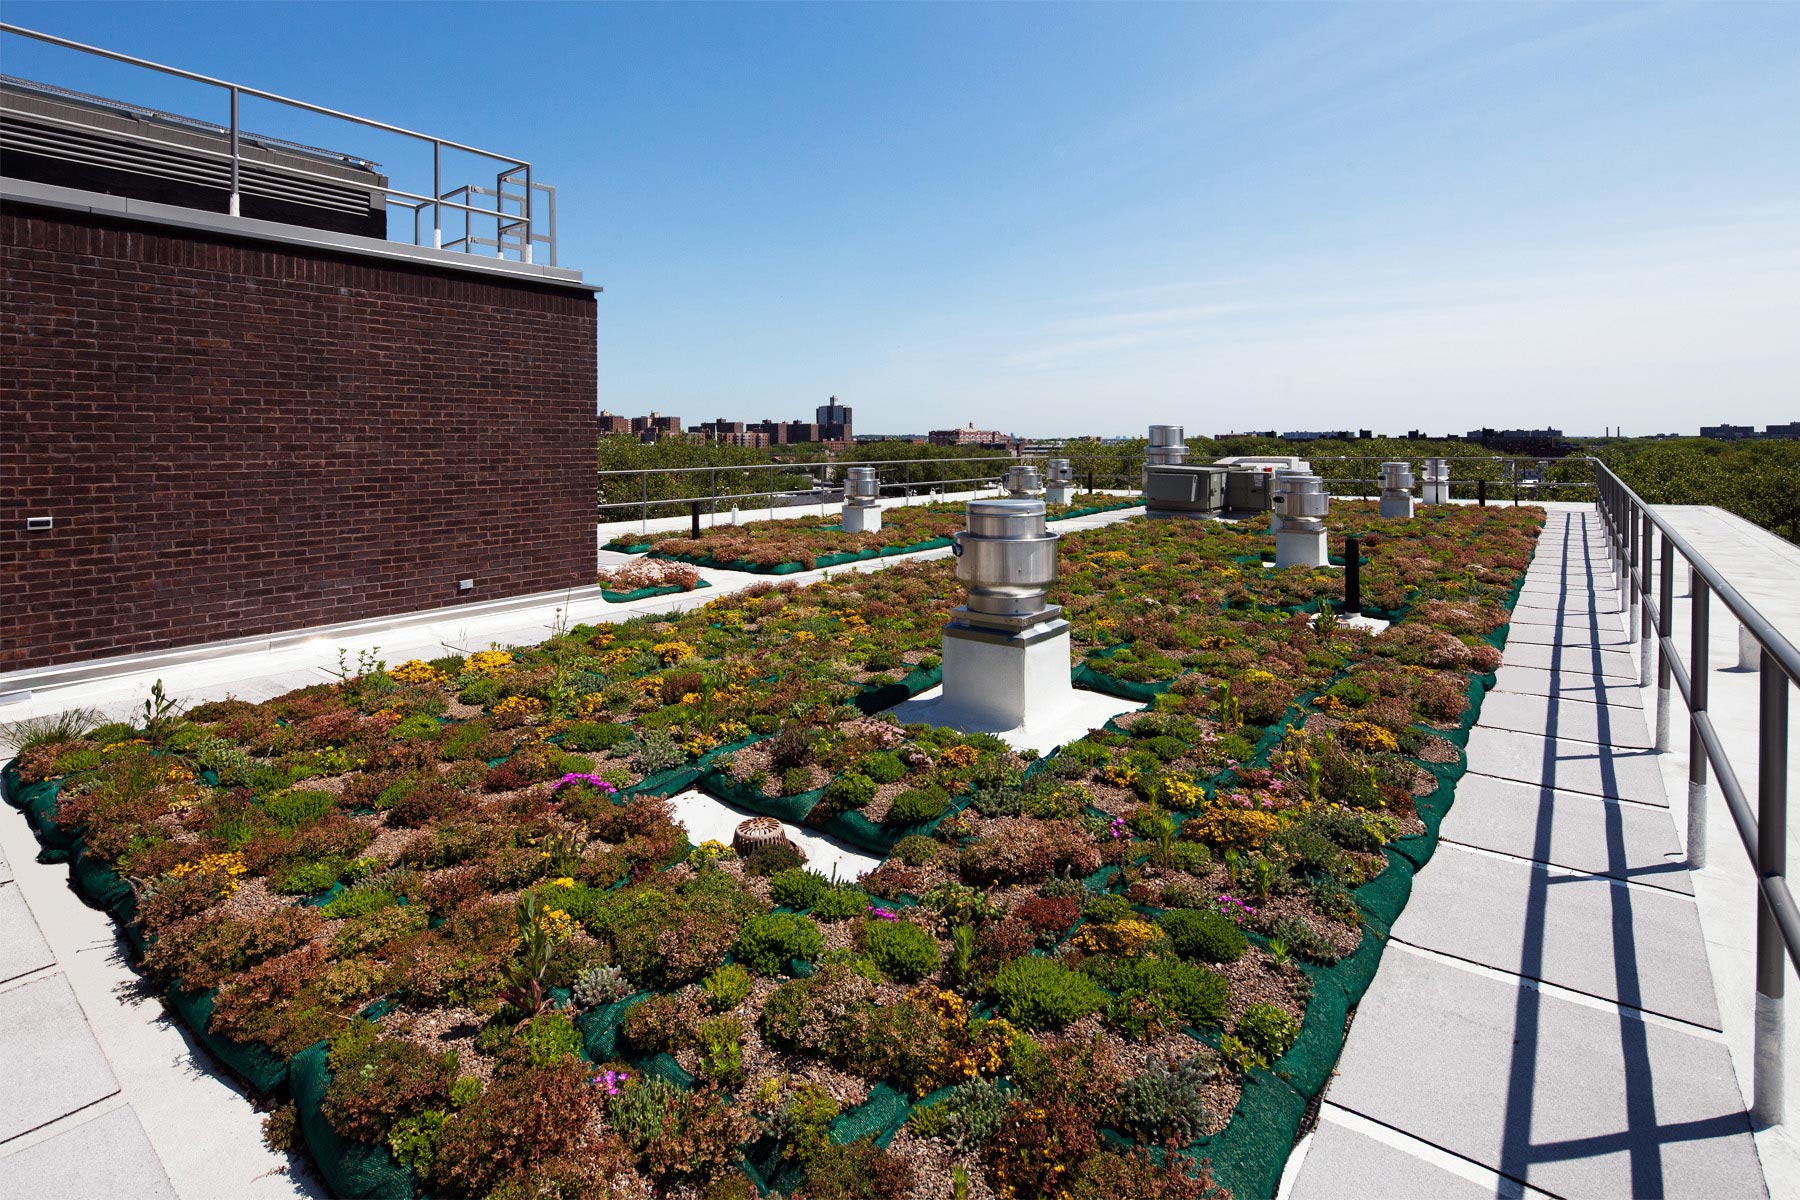 Roof garden on Breaking Ground's Hegeman residence in Brownsville, Brooklyn. The garden is designed not only to be beautiful but to improve the building's energy efficiency.